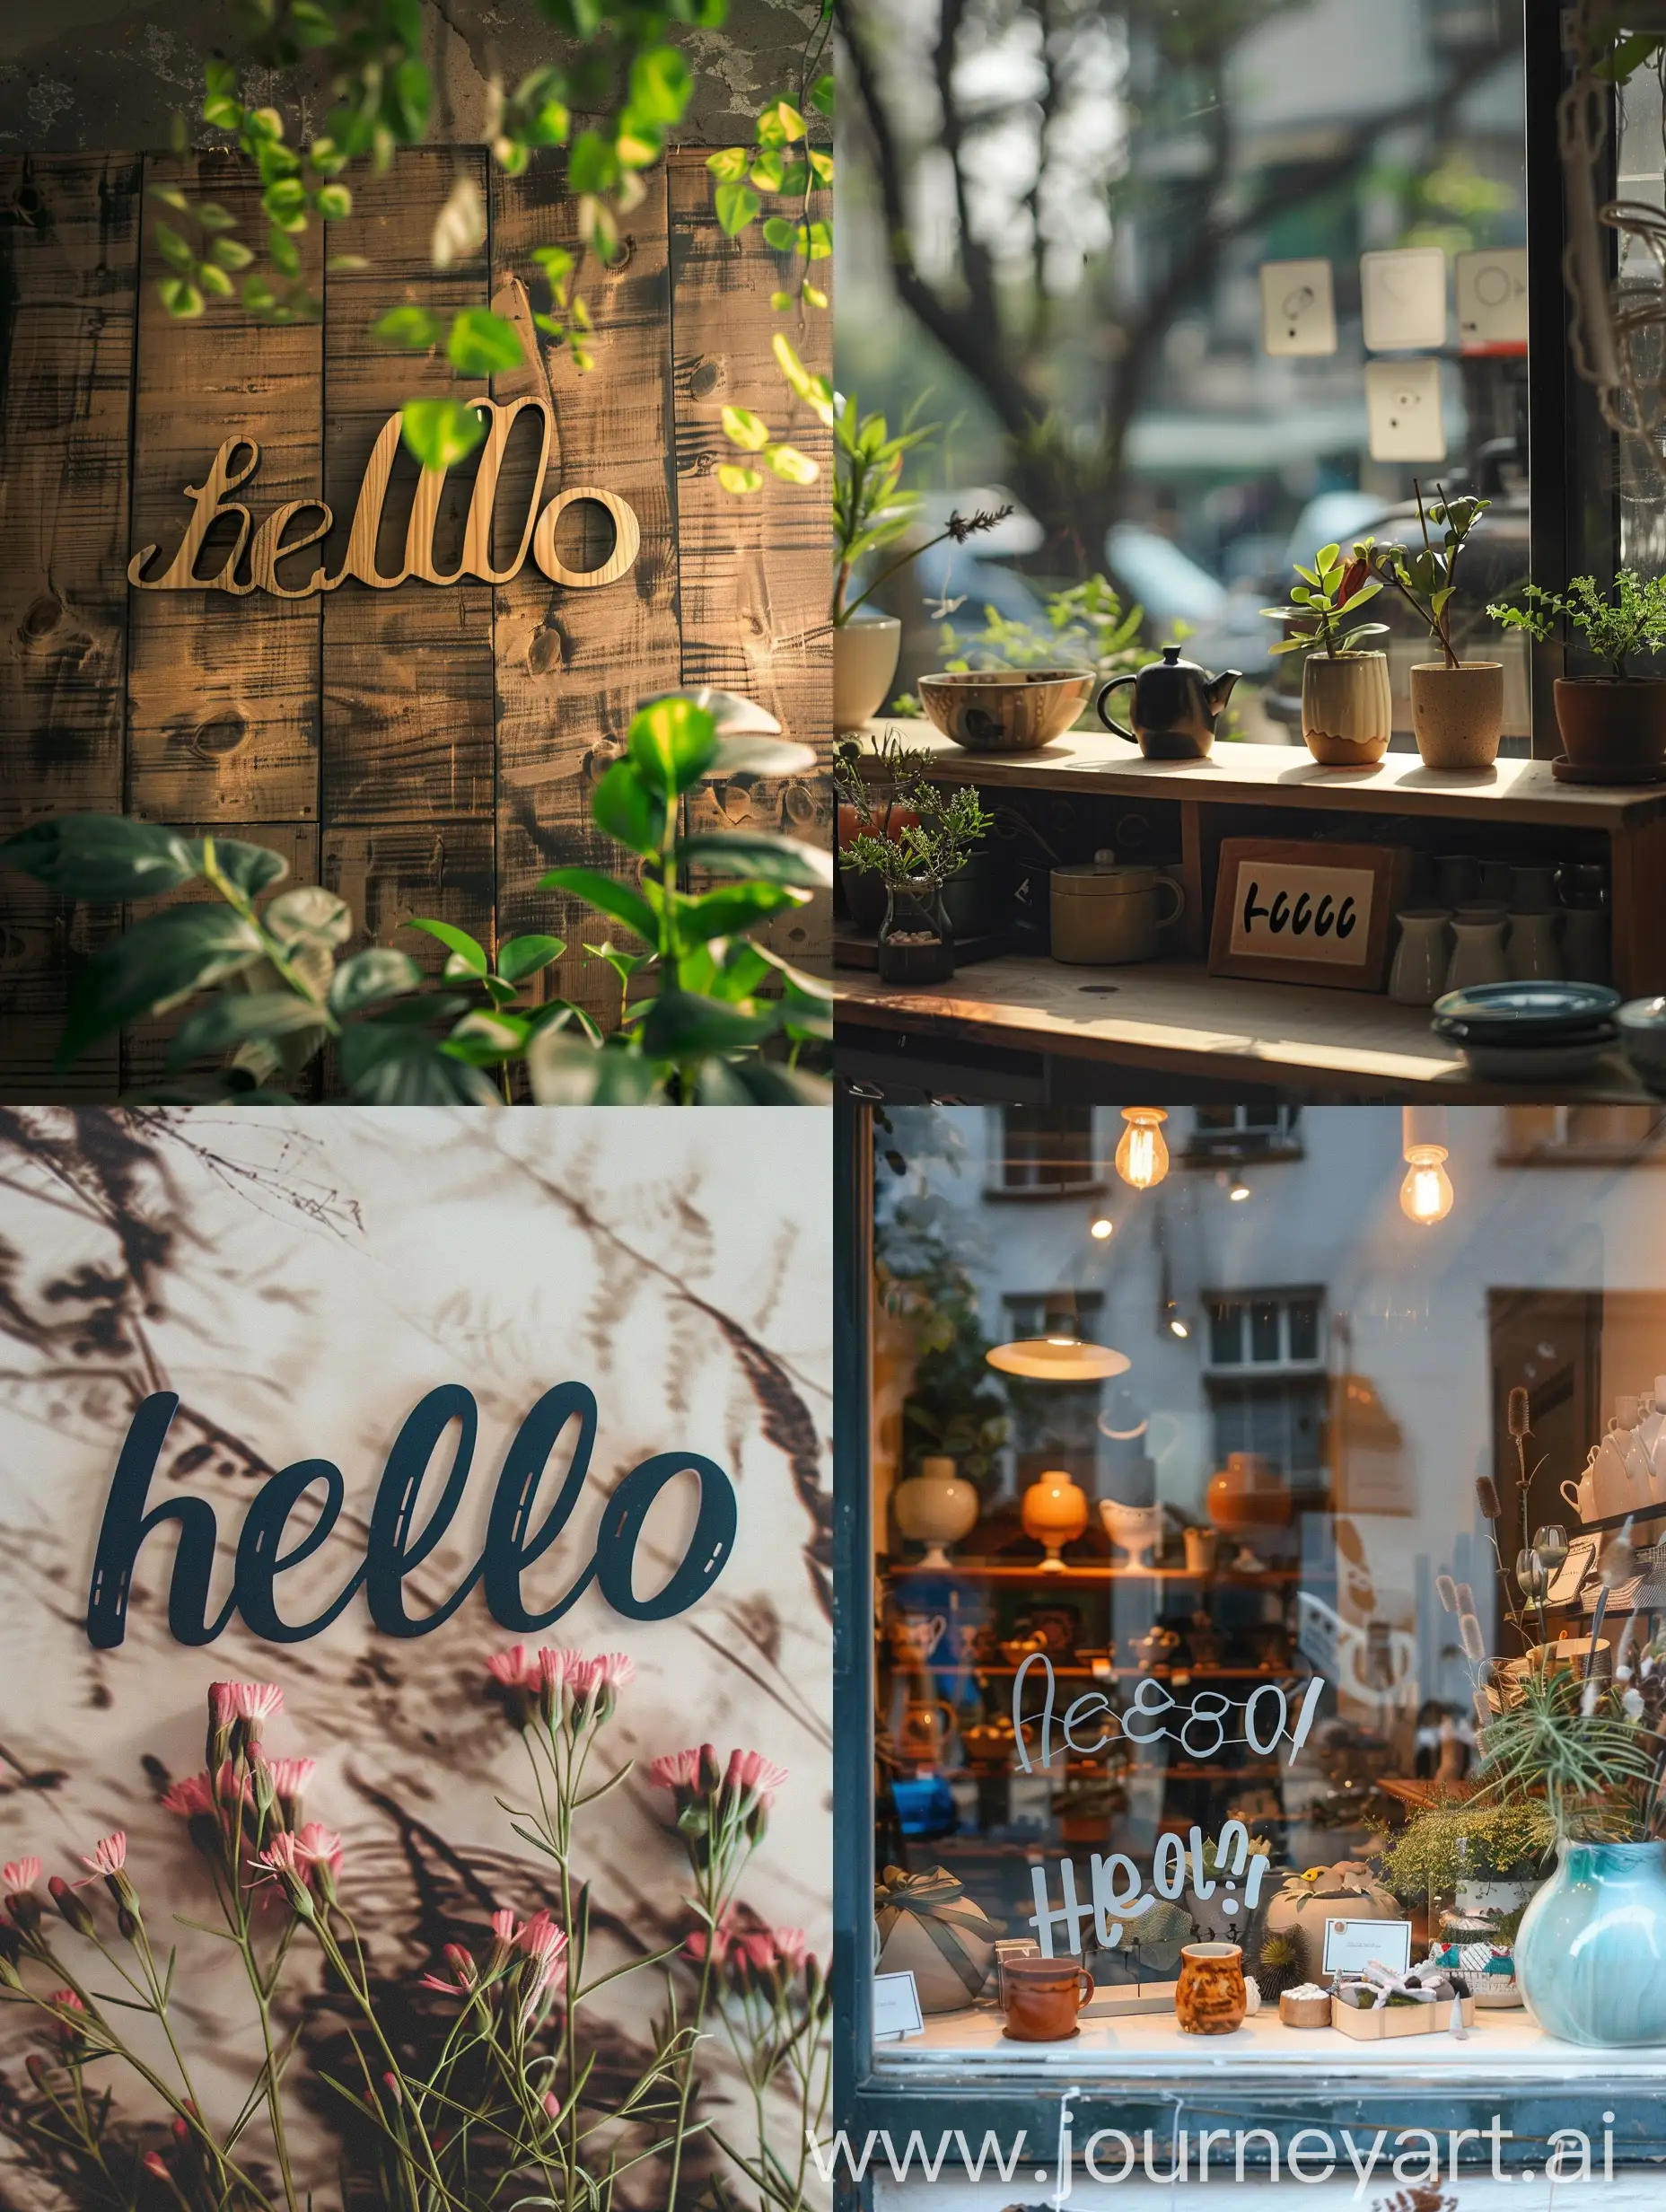 Cozy-Cafe-Greeting-Customers-with-Warm-Hello-Sign